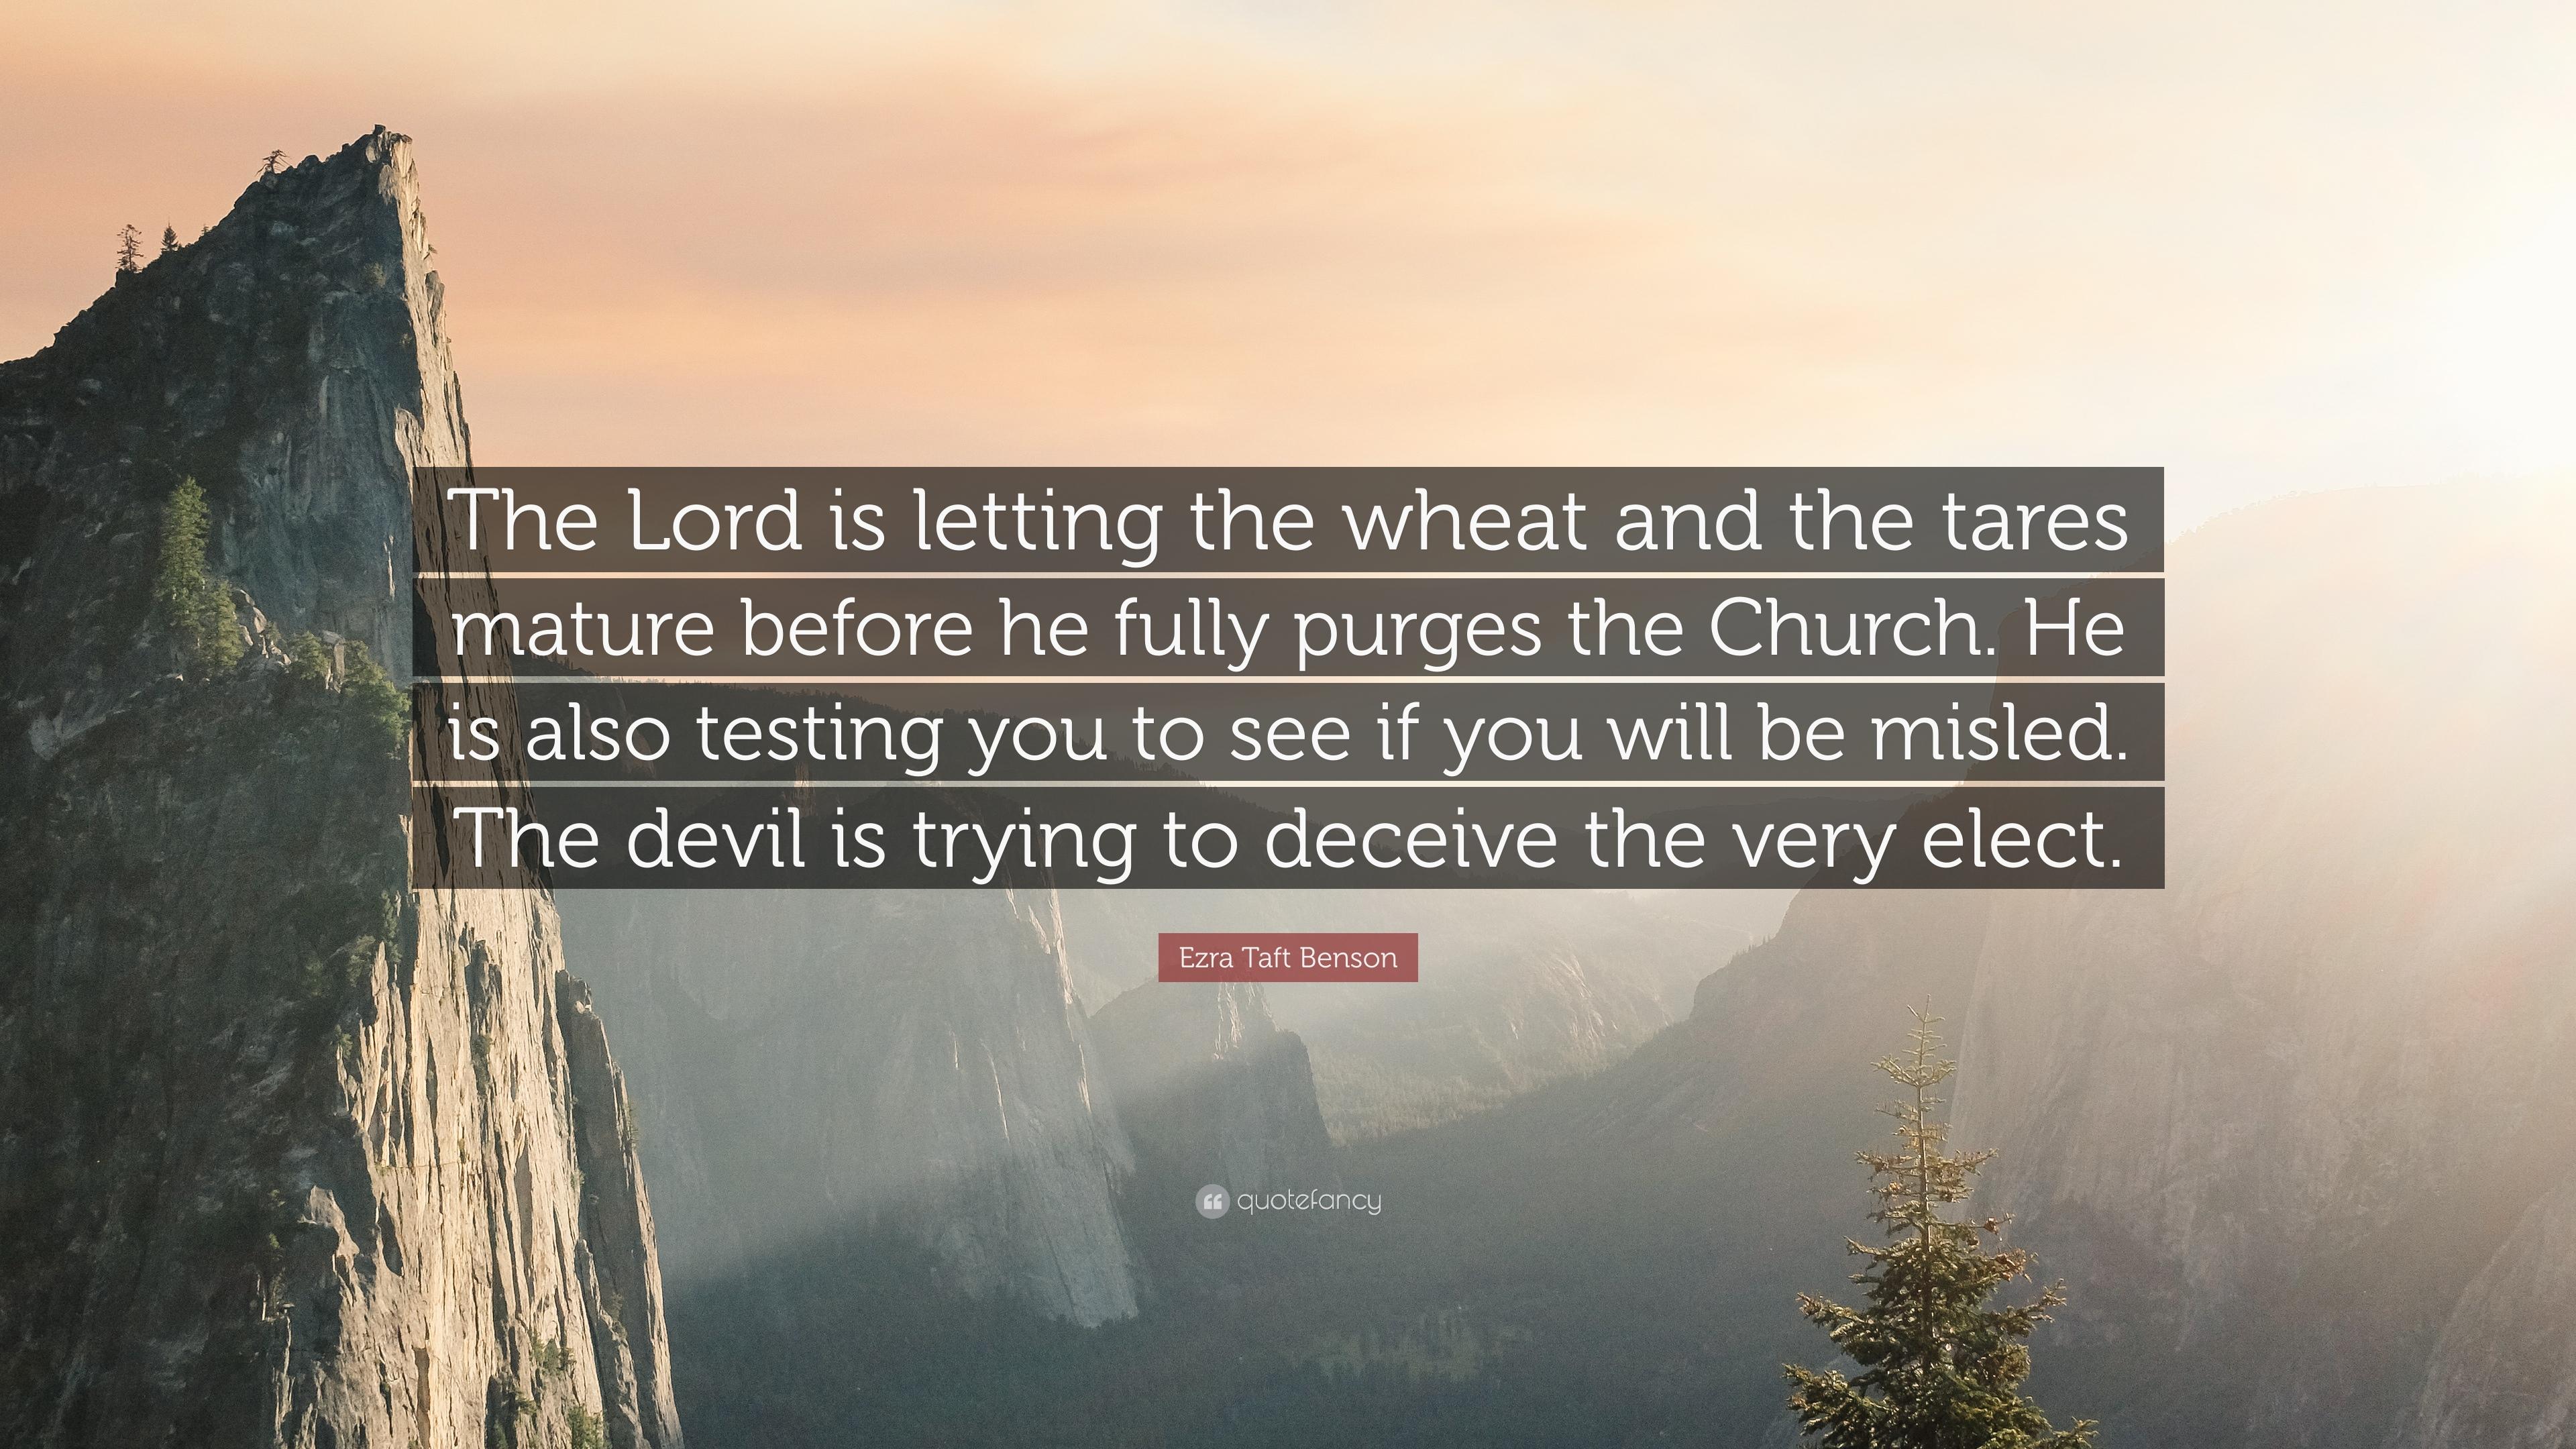 Ezra Taft Benson Quote: “The Lord is letting the wheat and the tares